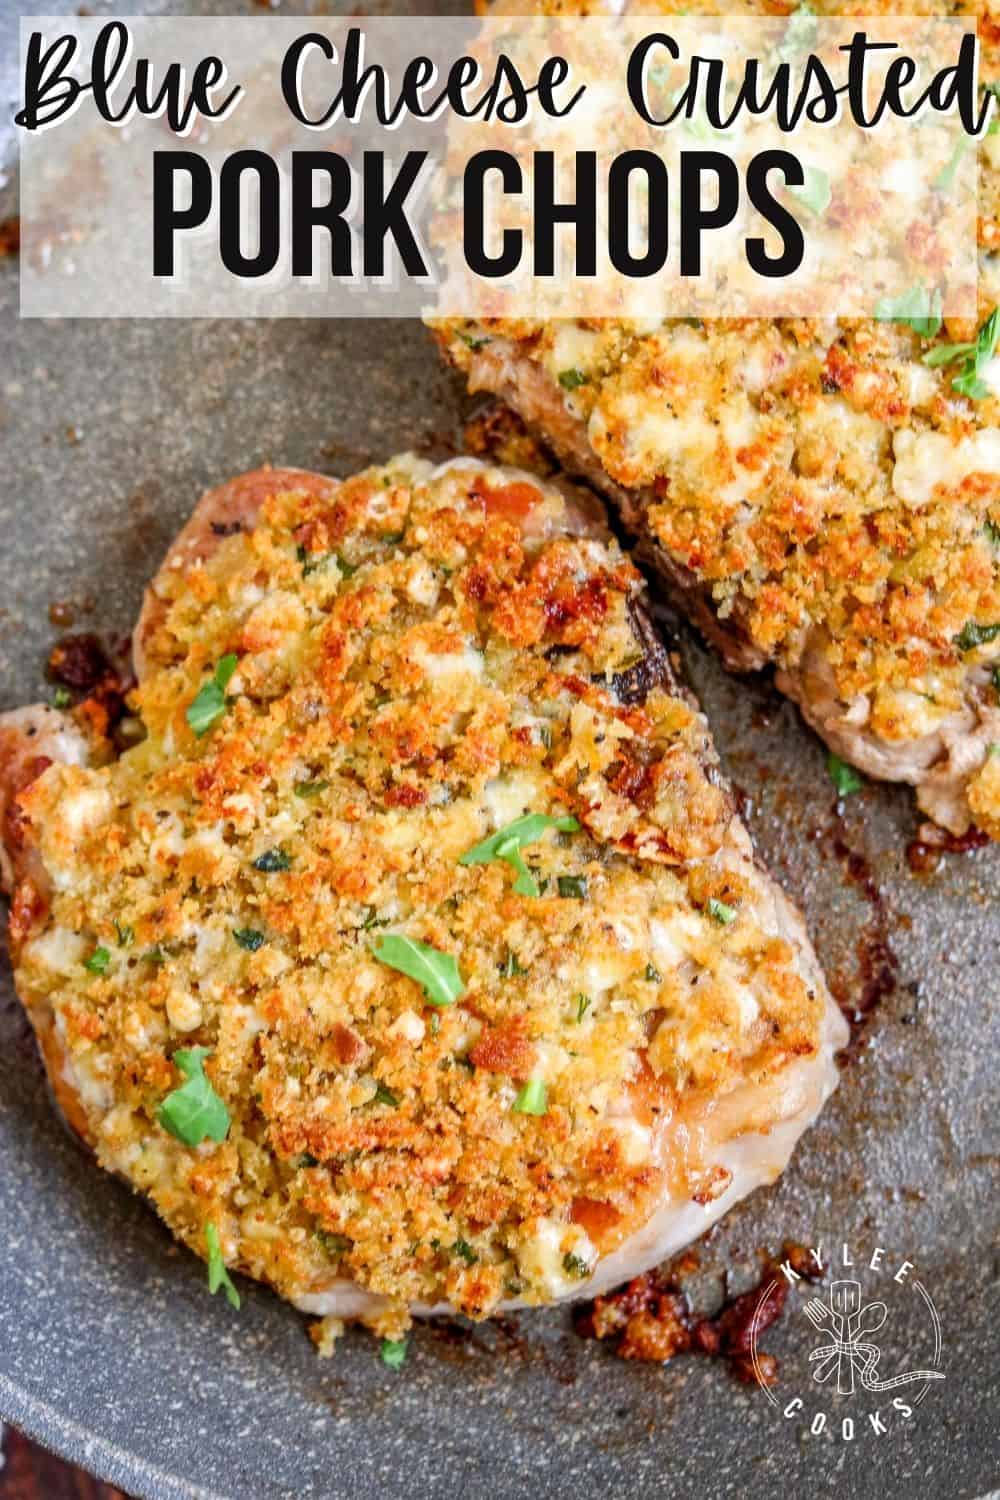 Blue Cheese Pork Chops with the recipe title in text overlaid